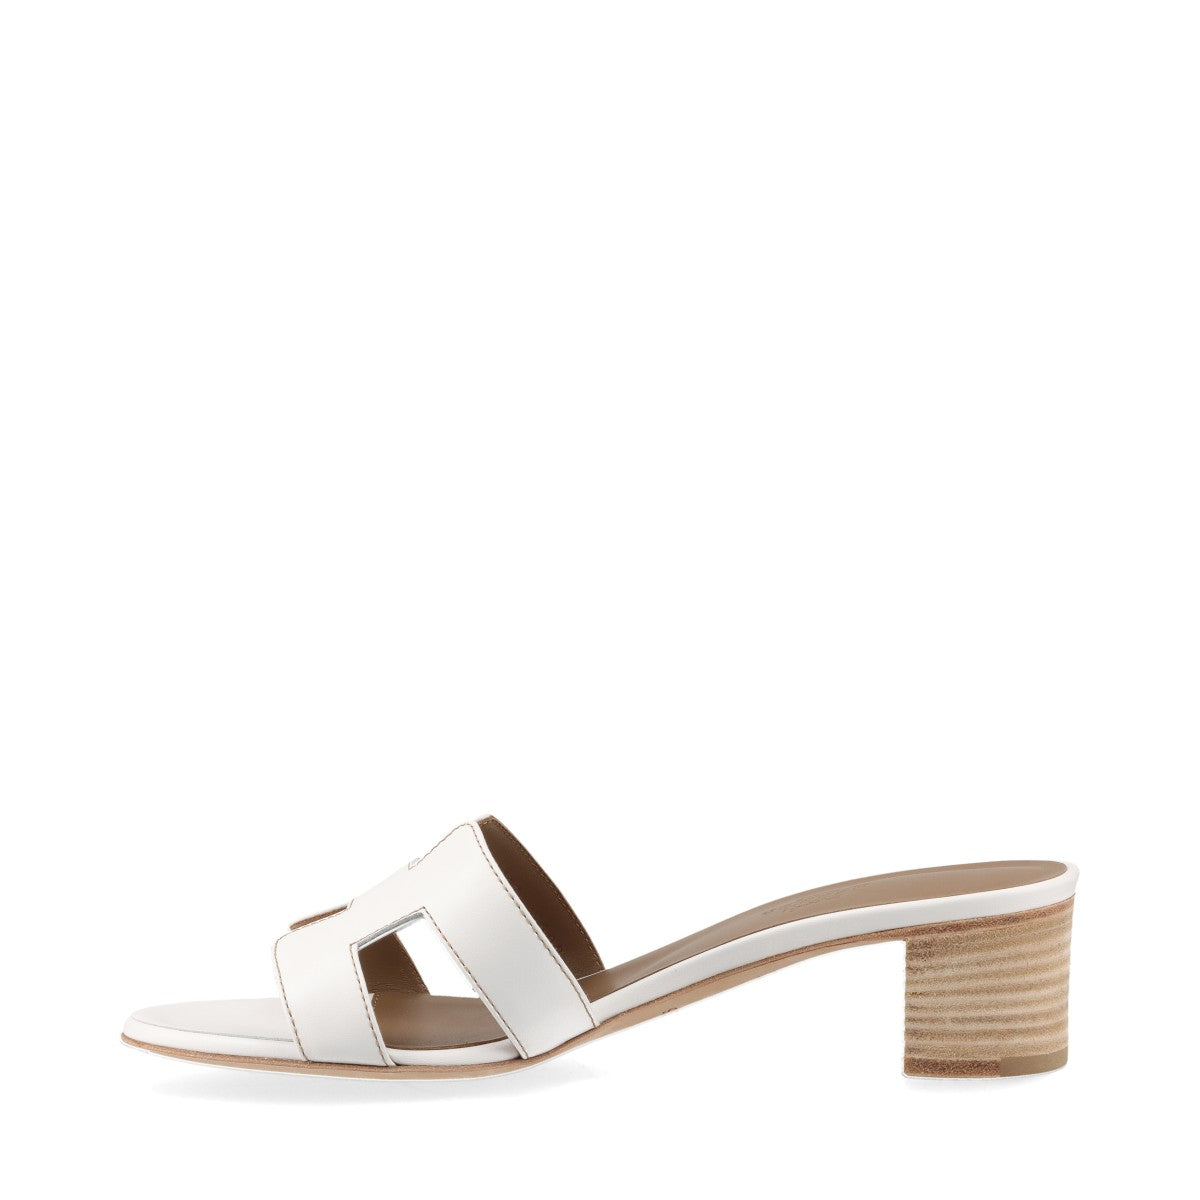 Hermès OASIS Leather Sandals 38.5 Ladies' White Box There is a storage bag